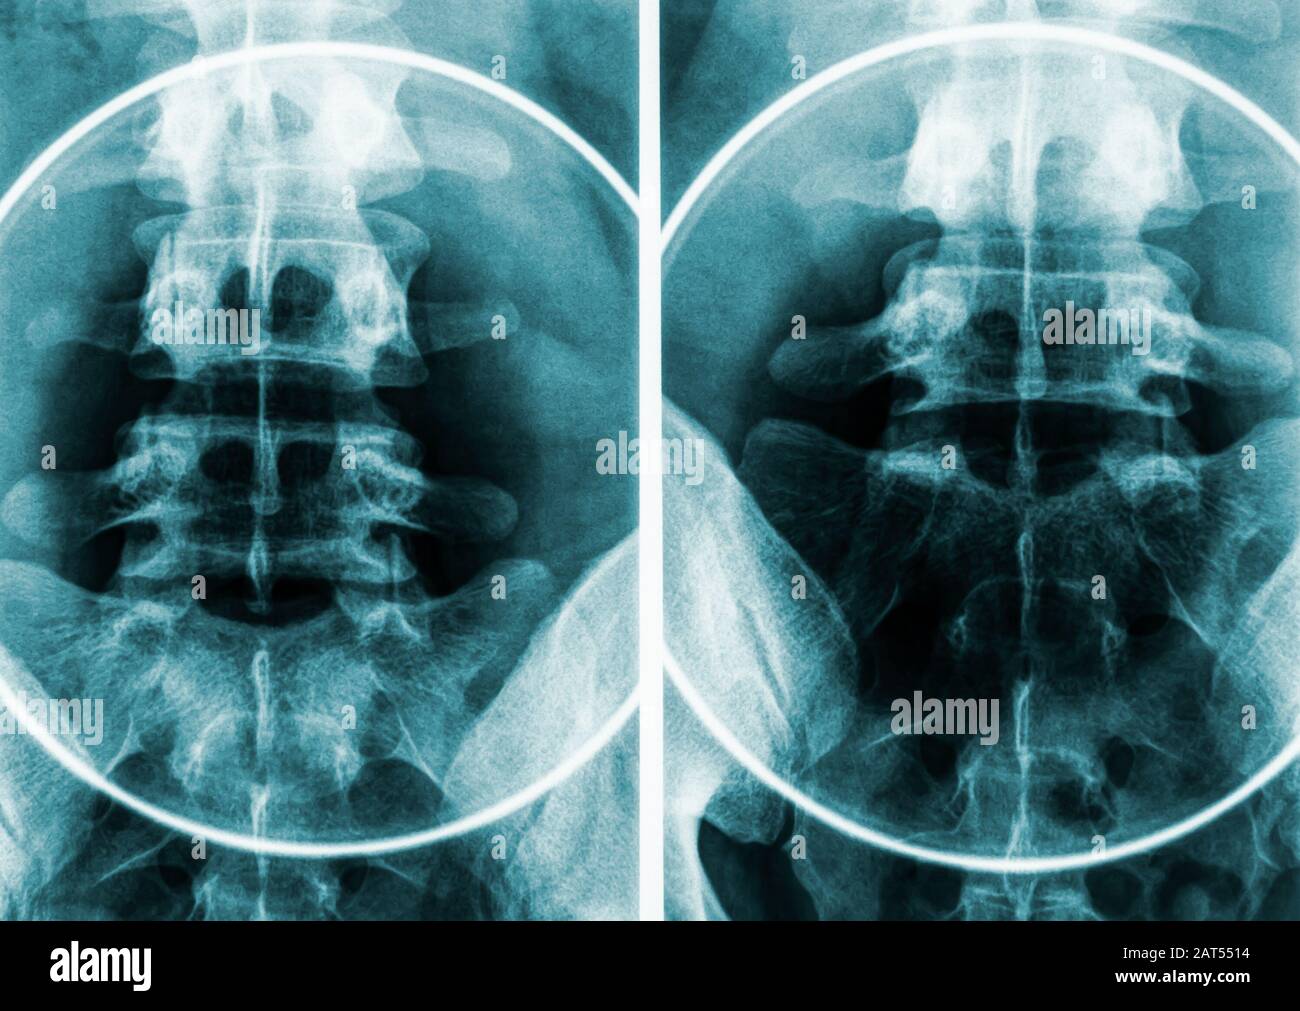 X-ray imagery or radiography of human male pelvis and lumbar vertebrae. Stock Photo